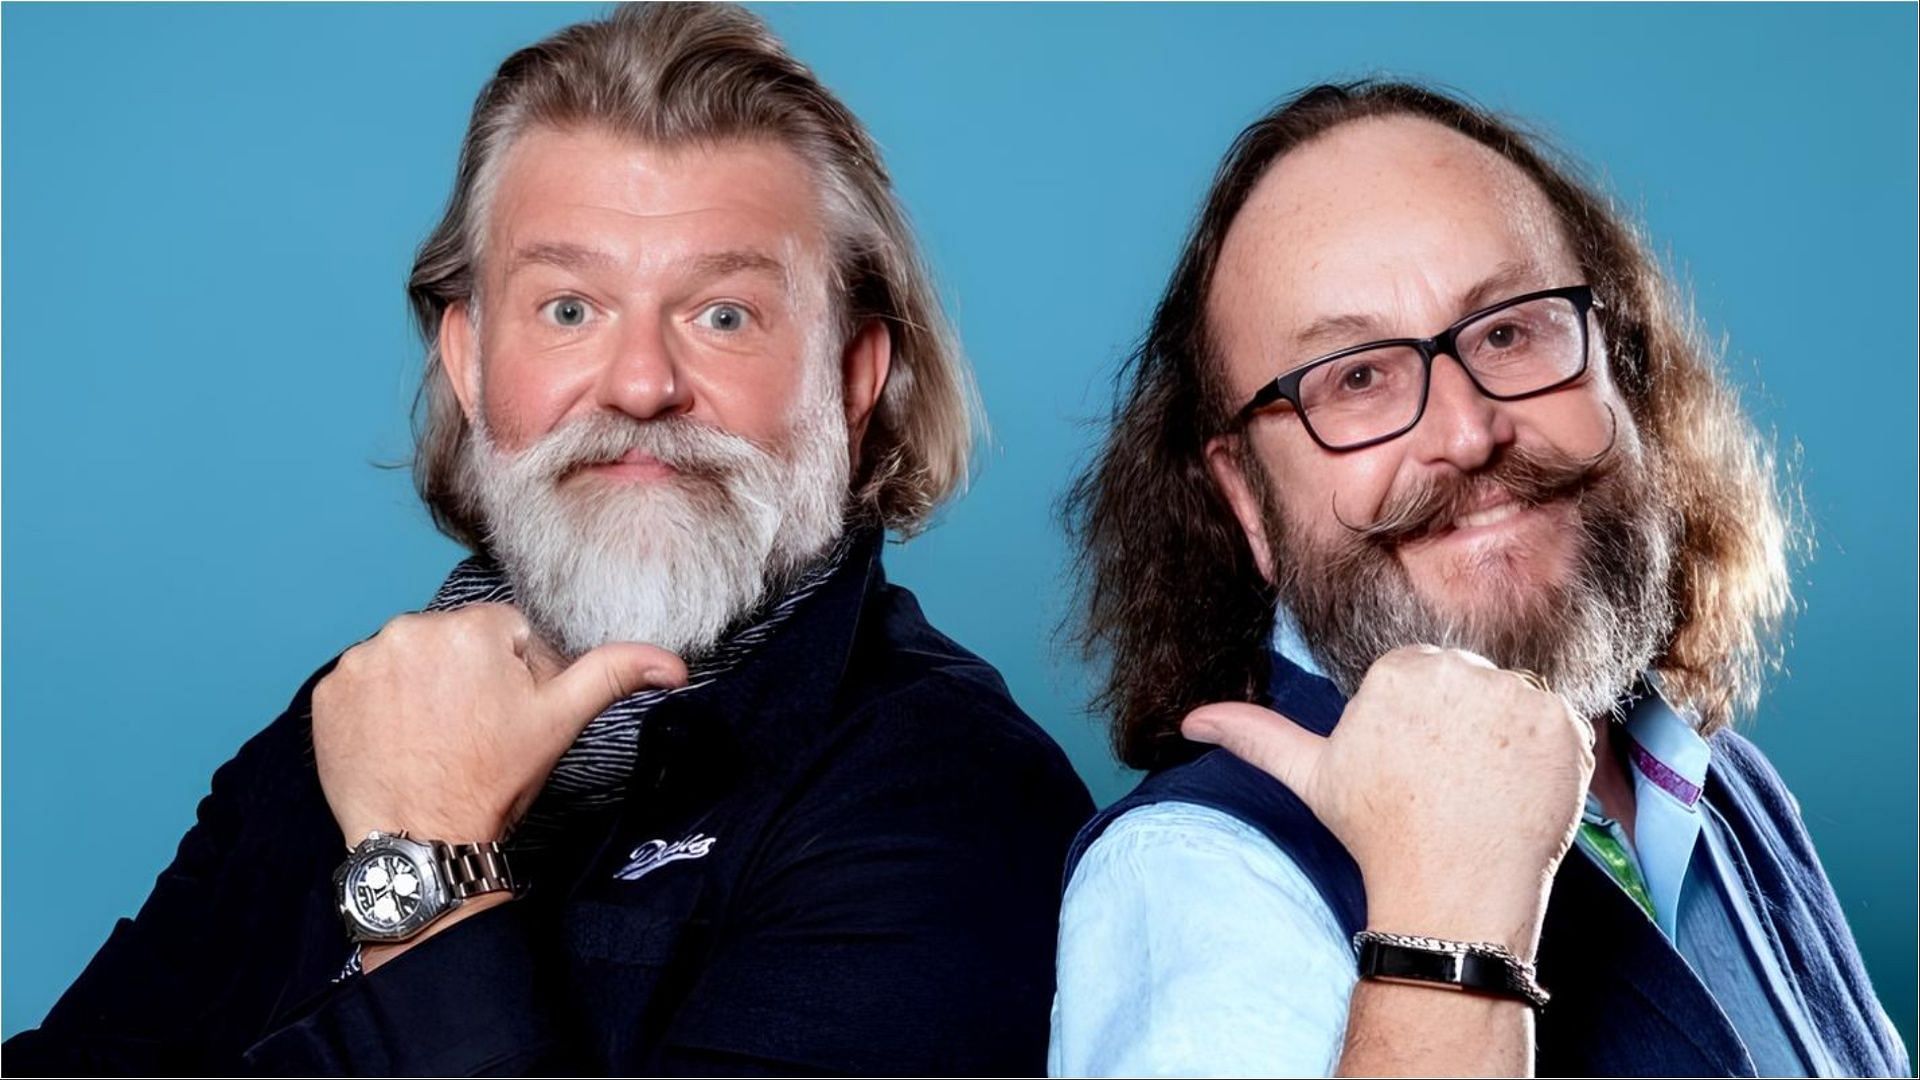 Dave Myers has died at the age of 66 after battling cancer for two years (Image via The Hairy Bikers/Facebook)